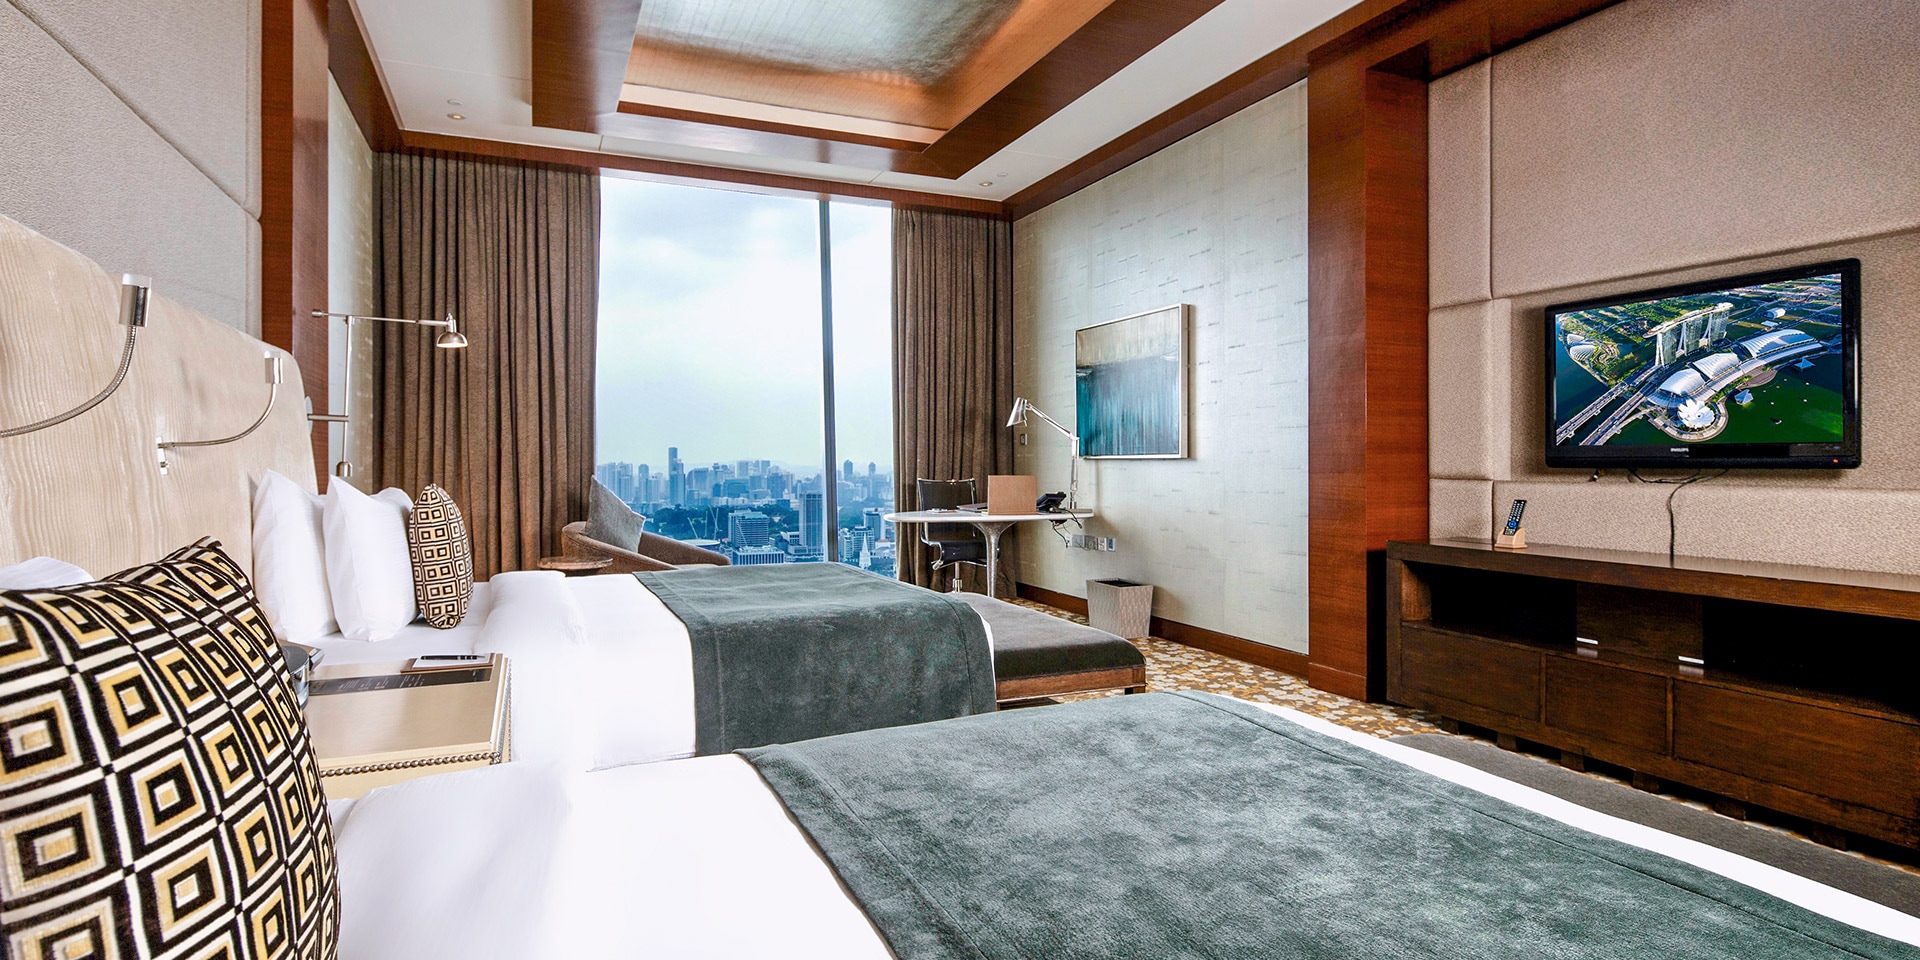 Straits Suite with City View from Living Room, Marina Bay Sands